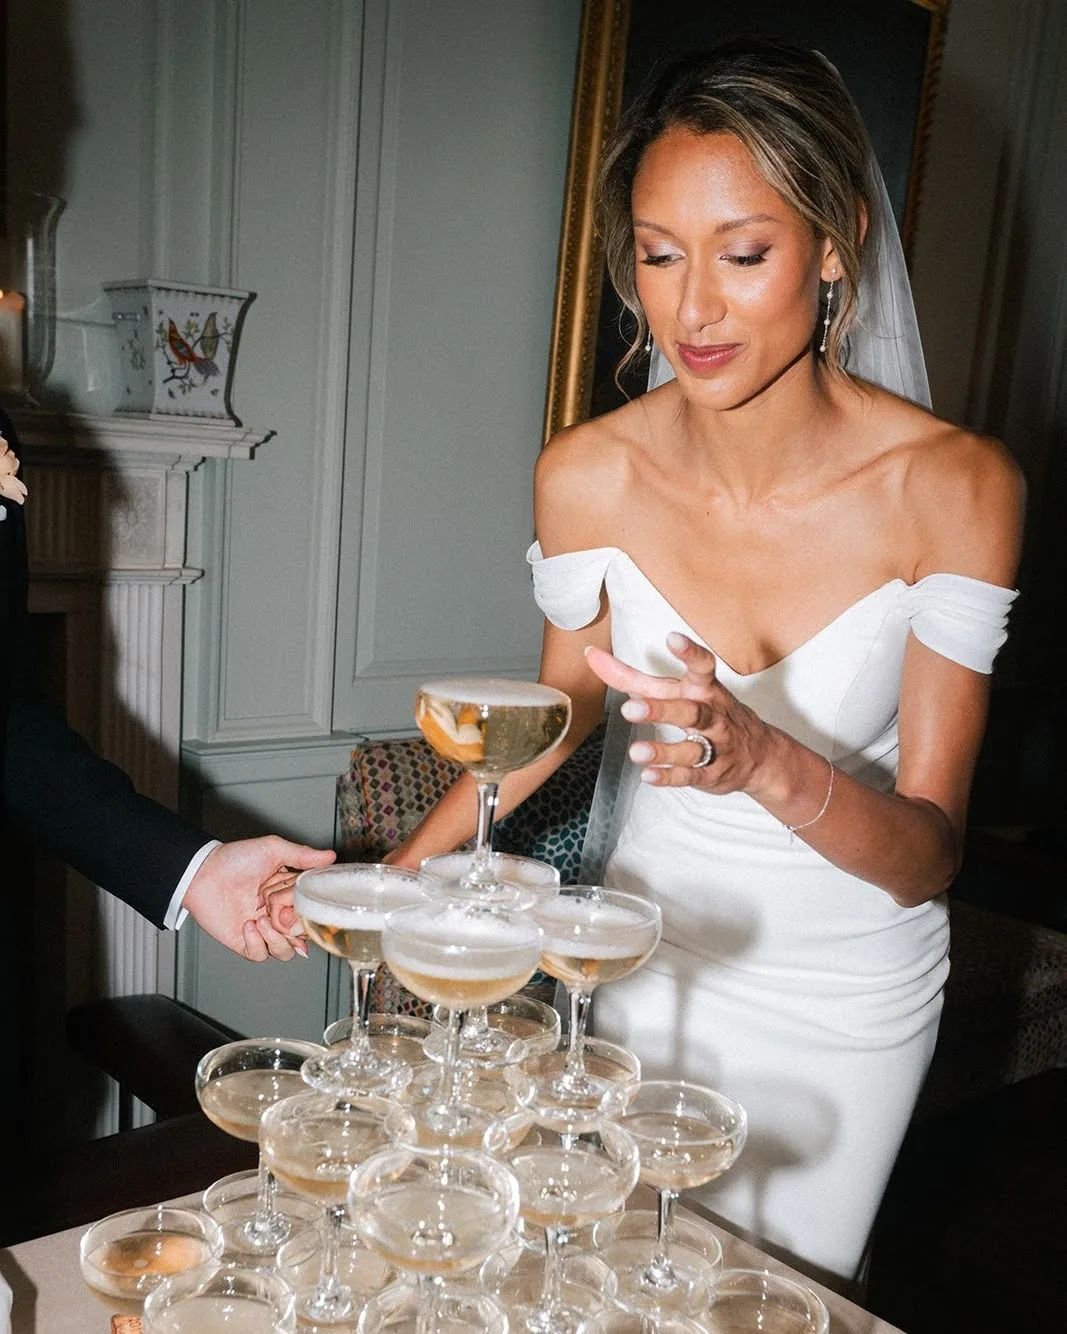 A champagne tower is always a good idea 🥂🍾
Believe it or not, this is a real wedding and not an extremely high-fashion editorial! Shot by the wonderful @rebeccareesphotography 📷
I loved being a part of this stunning wedding alongside my babe @ro.h